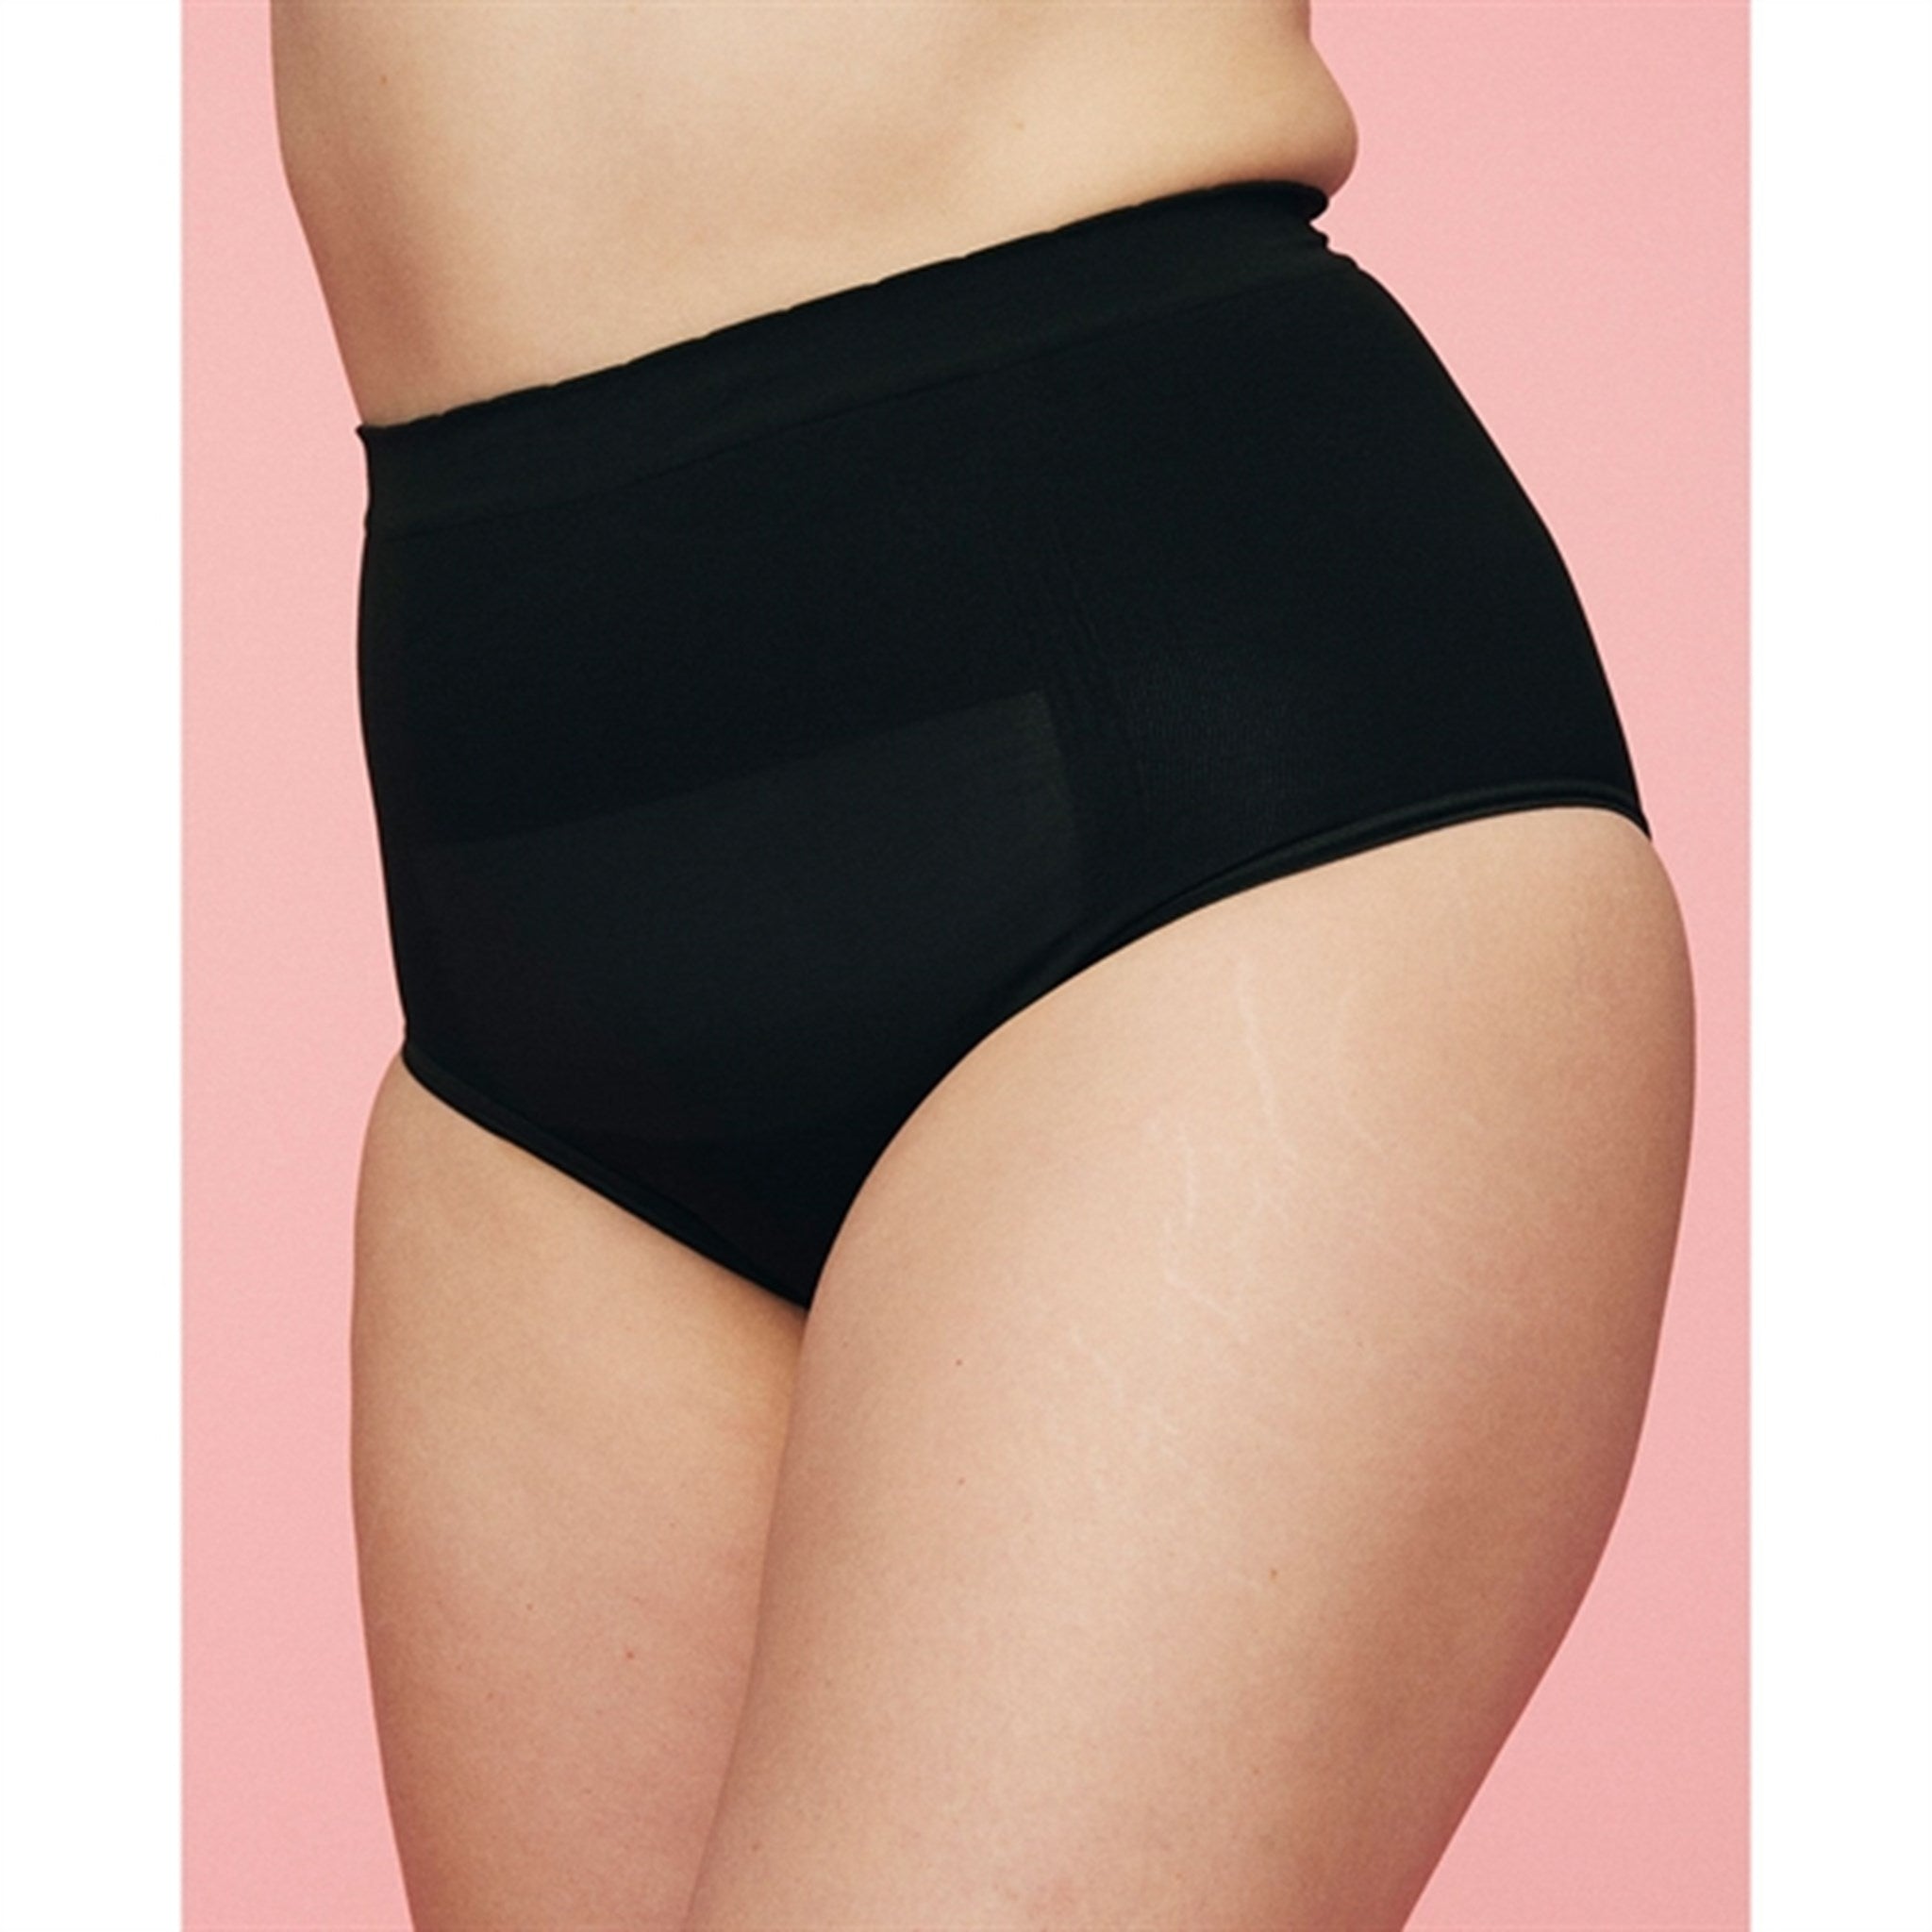 momkind C-section Panties – Support Scar and Belly Black 5